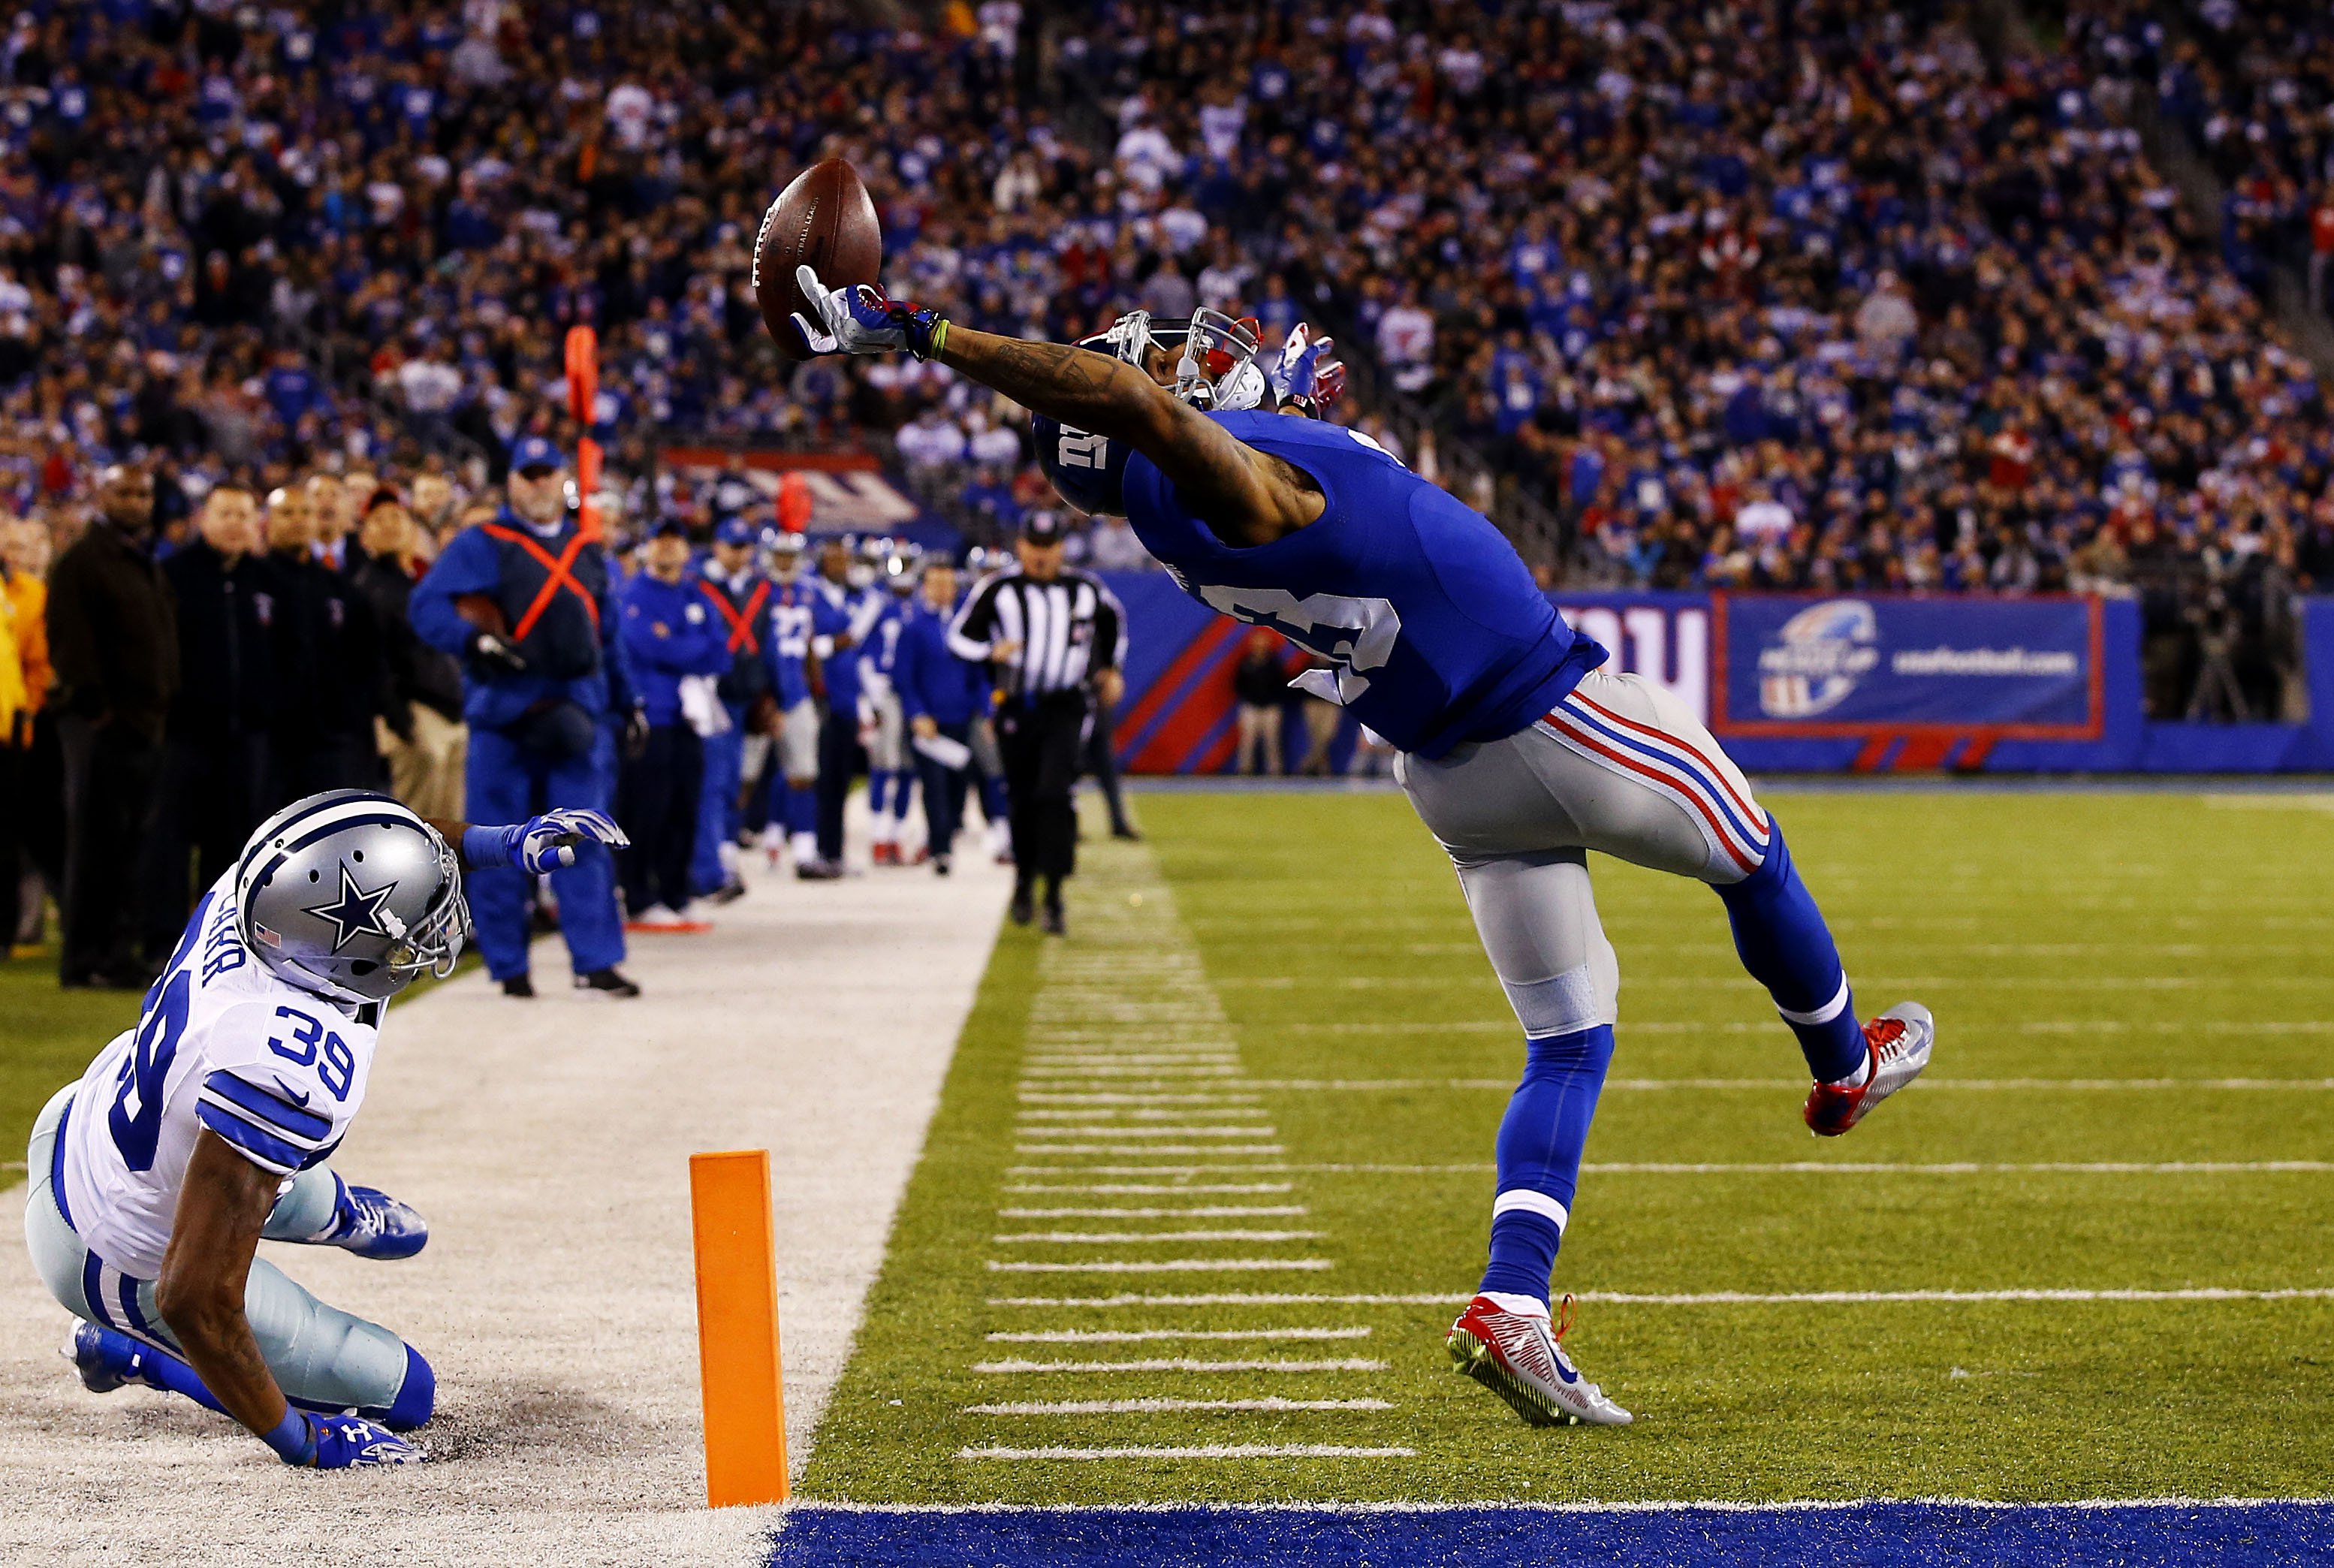 Odell Beckham #13 of the New York Giants scores a touchdown in the second quarter against the Dallas Cowboys at MetLife Stadium on Nov. 23, 2014 in East Rutherford, N.J.